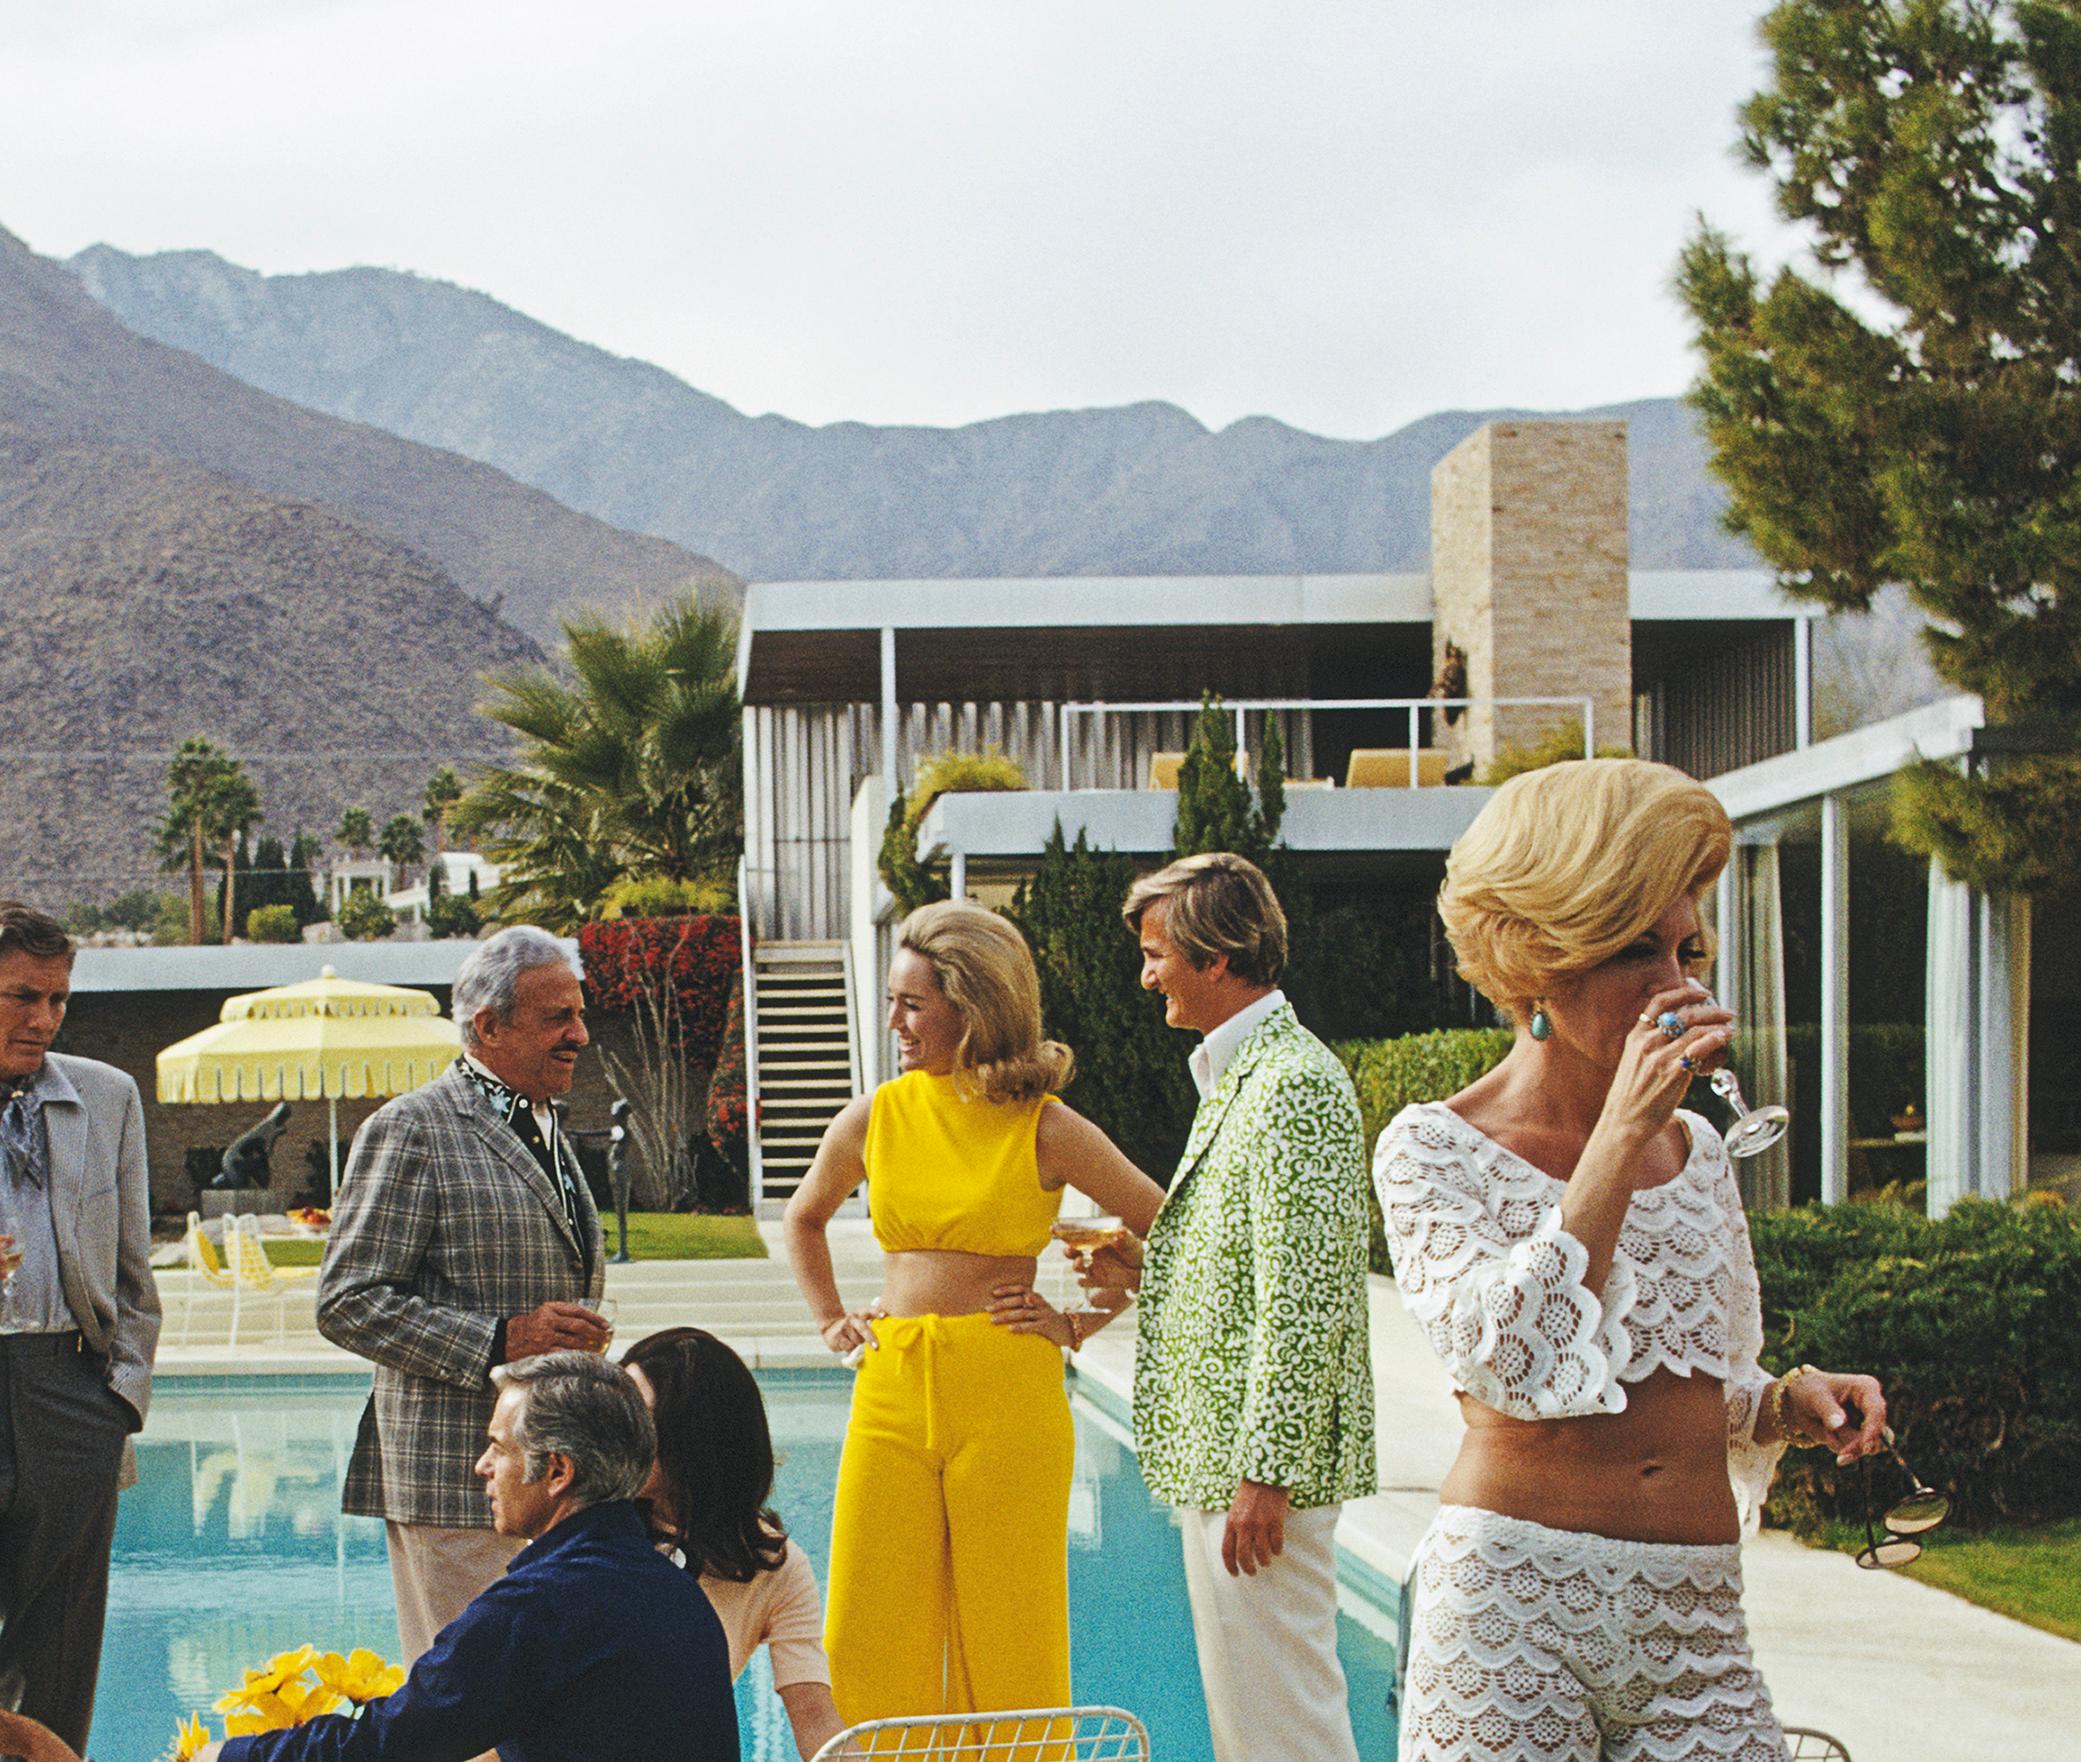 Slim Aarons Estate Print - Desert House Party - Oversize

A poolside party at a desert house, designed by Richard Neutra for Edgar J. Kaufmann, in Palm Springs, January 1970. Featured in the group are: industrial designer Raymond Loewy (1893 - 1986,